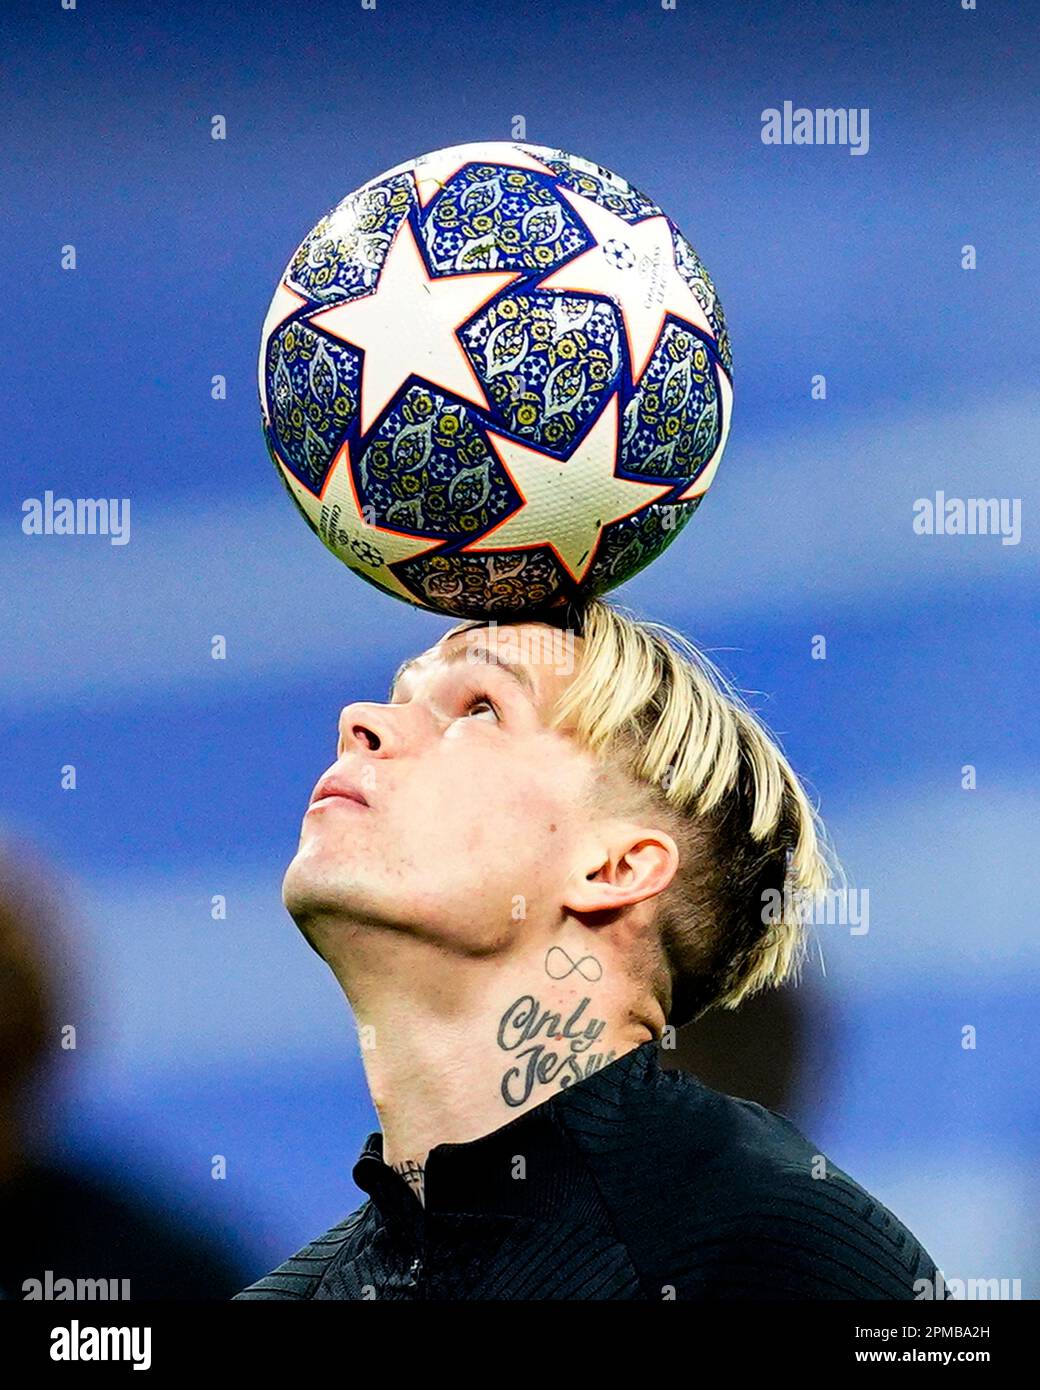 Madrid, Spain. 12/04/2023, Mykhailo Mucryk of Chelsea FC during the UEFA Champions League match, Quarter-Finals, 1st leg between Real Madrid and Chelsea FC played at Santiago Bernabeu Stadium on April 12, 2023 in Madrid, Spain. (Photo by Sergio Ruiz / PRESSIN) Stock Photo